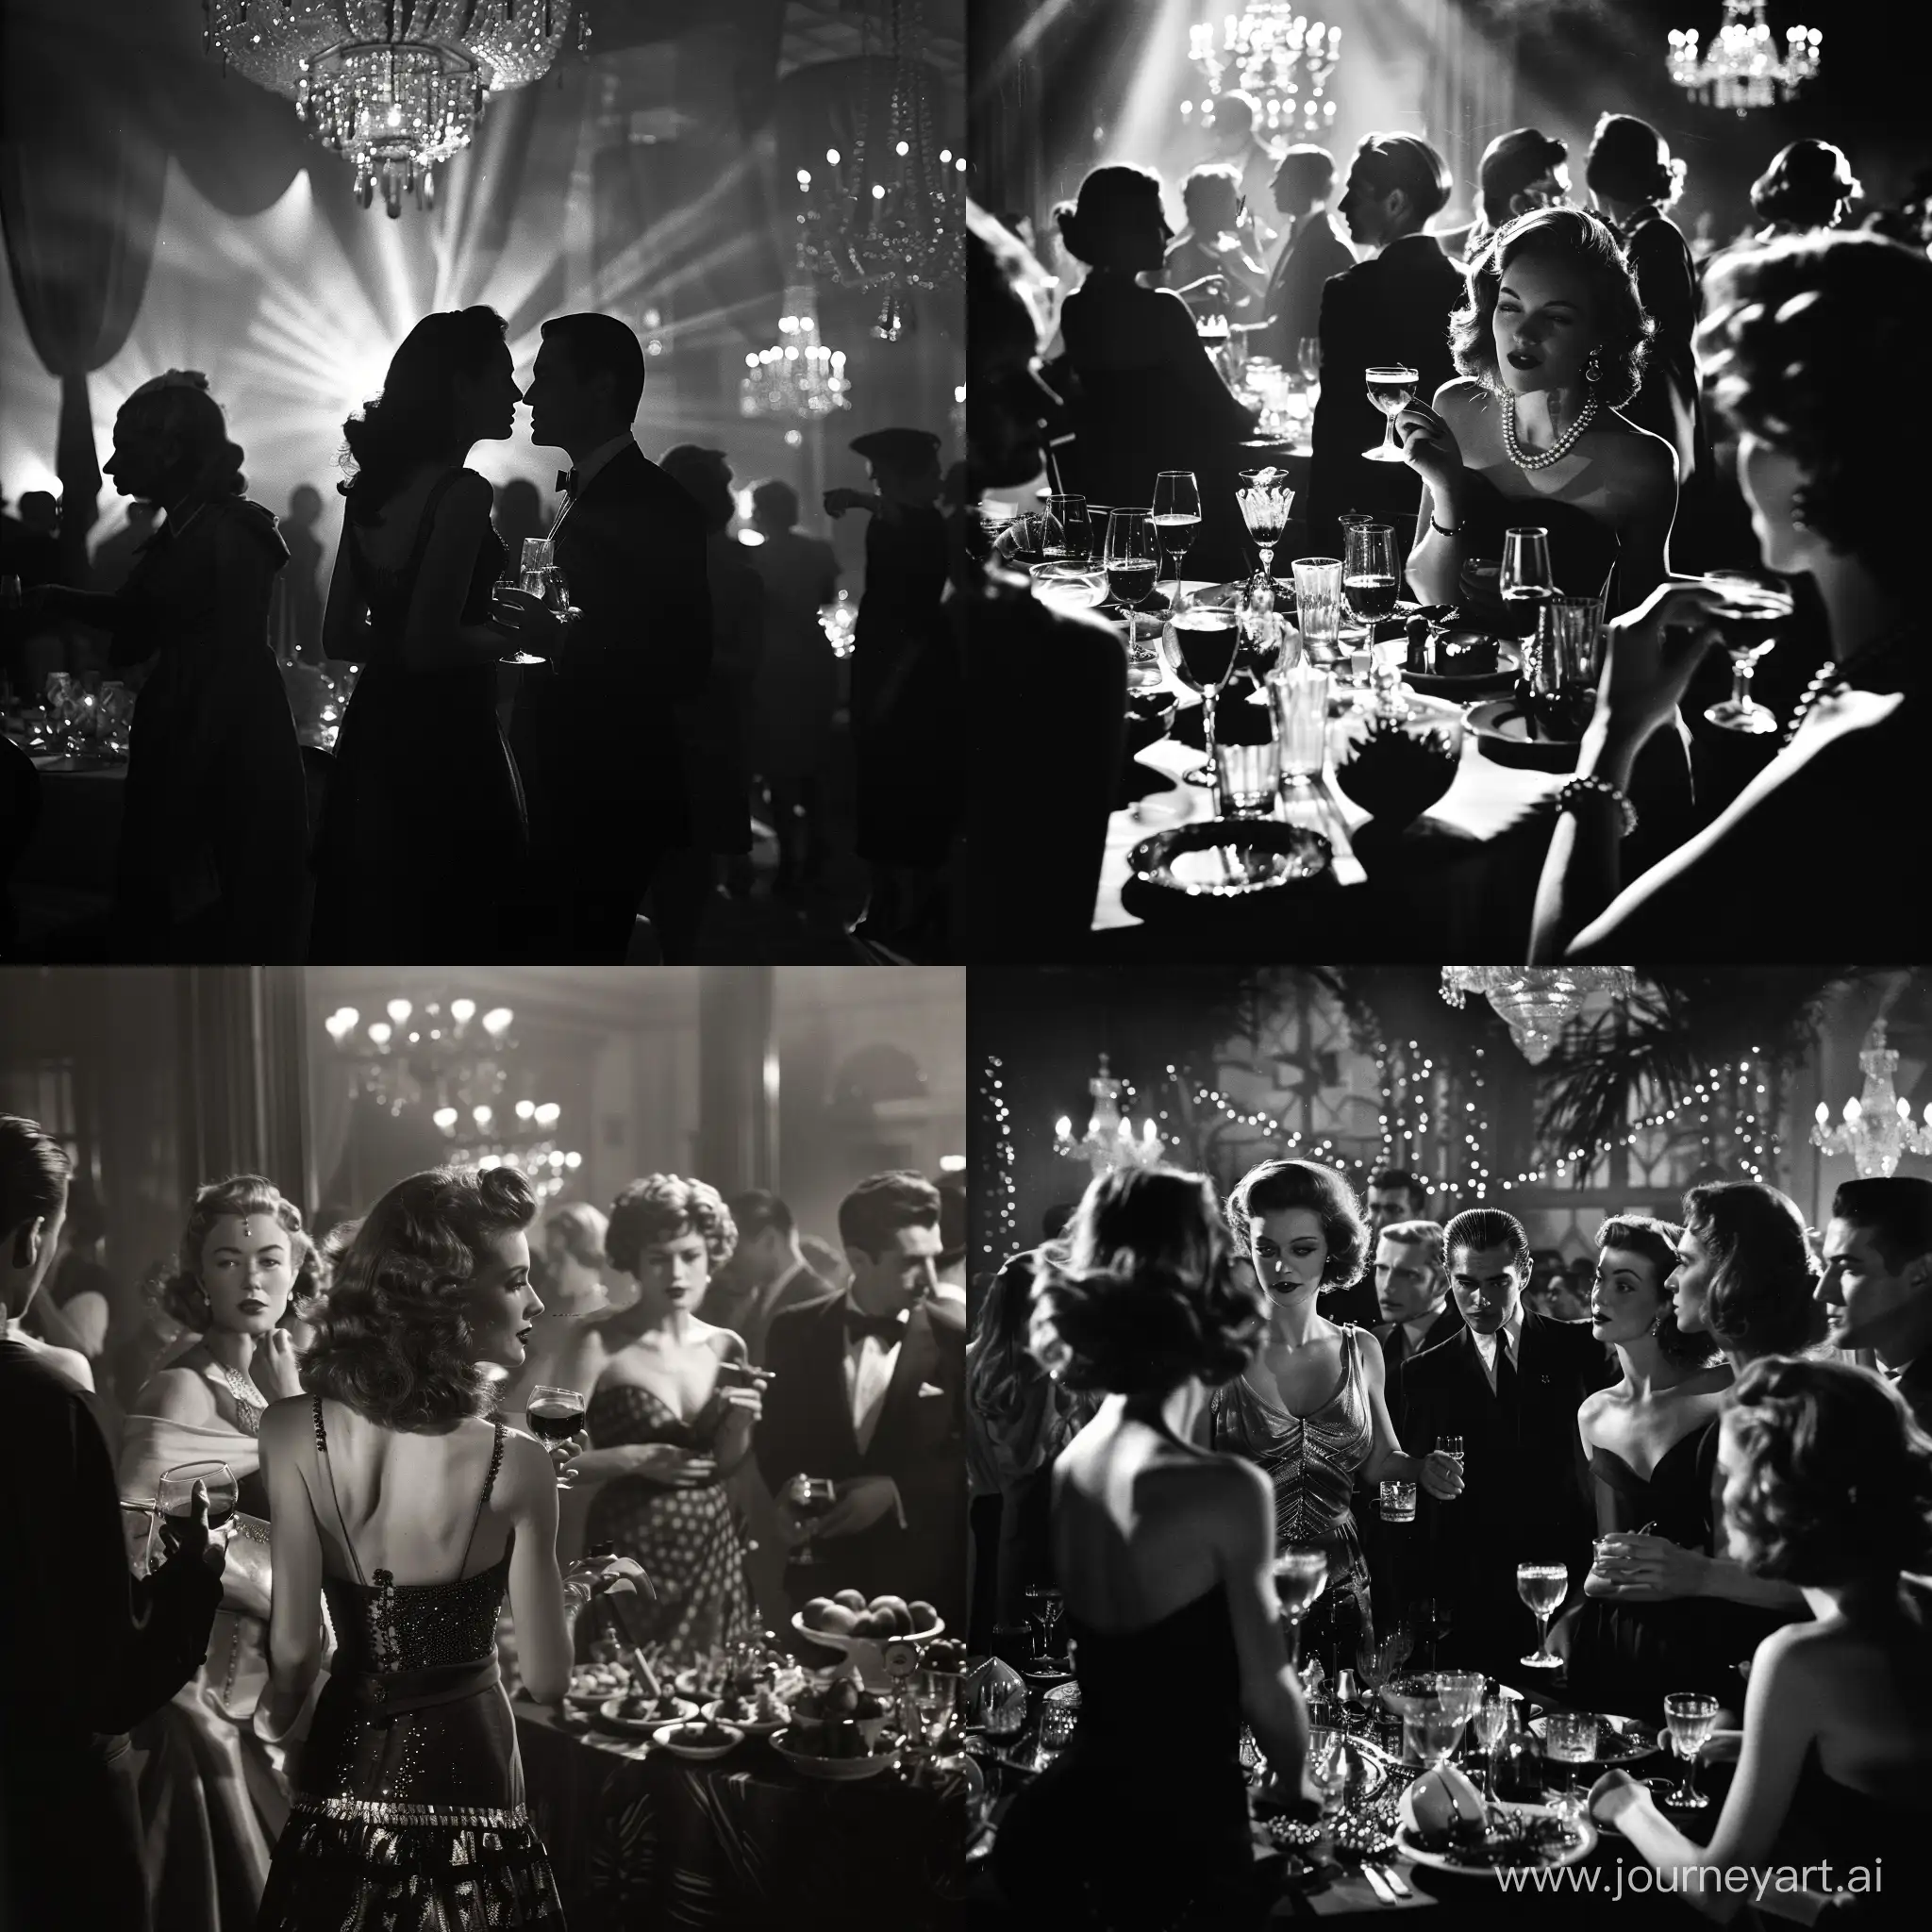 Noir shot of a scene from 1940s glamorous high-class party